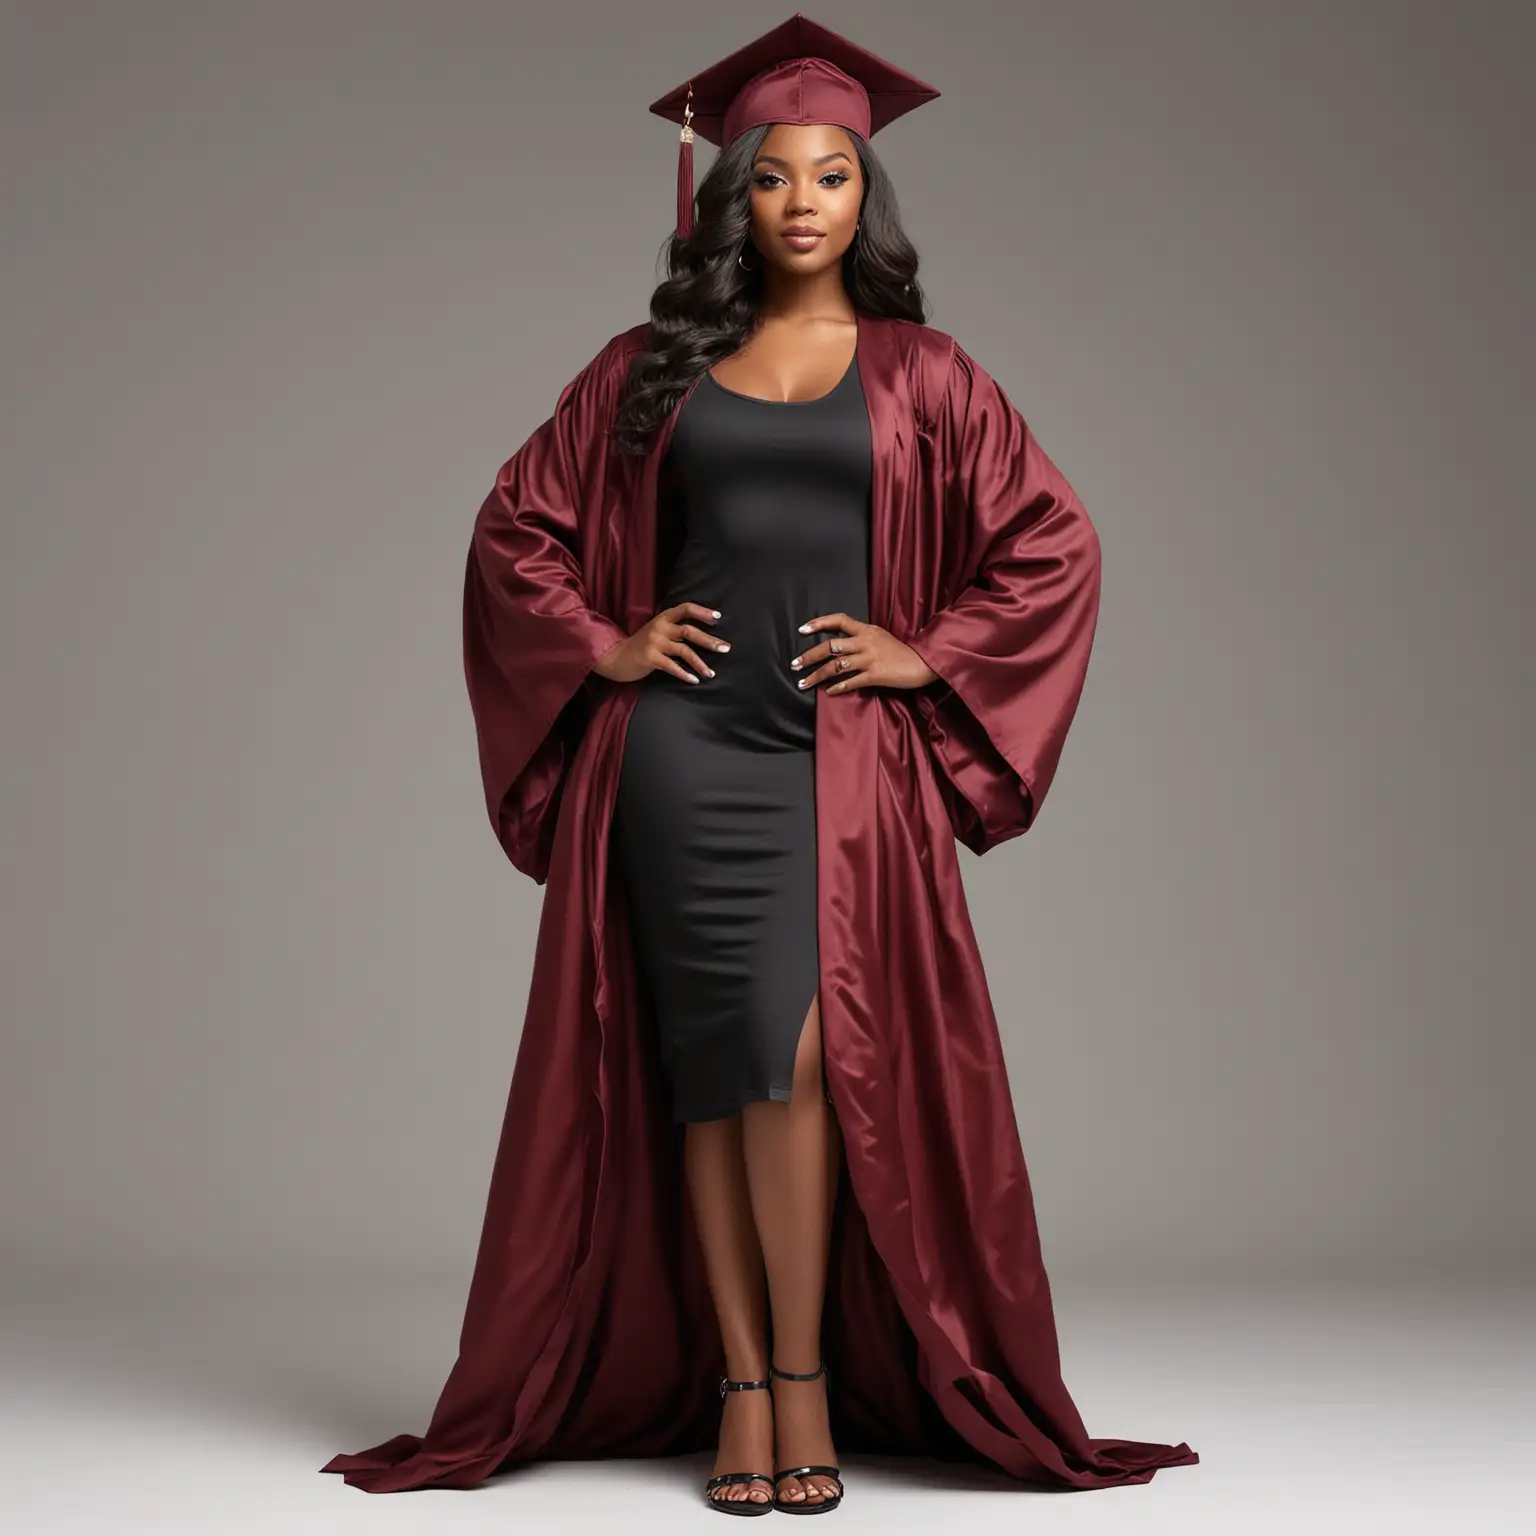 Professional mockup photo of a beautiful black female 20 wearing a maroon graduation cap and gown with long black body wave hair with glam make up, holding her hip with nice long legs showing out the gown, hyper-realistic, facing camera, showing t-shirt, studio lighting, full body, 7mm lens, white background.